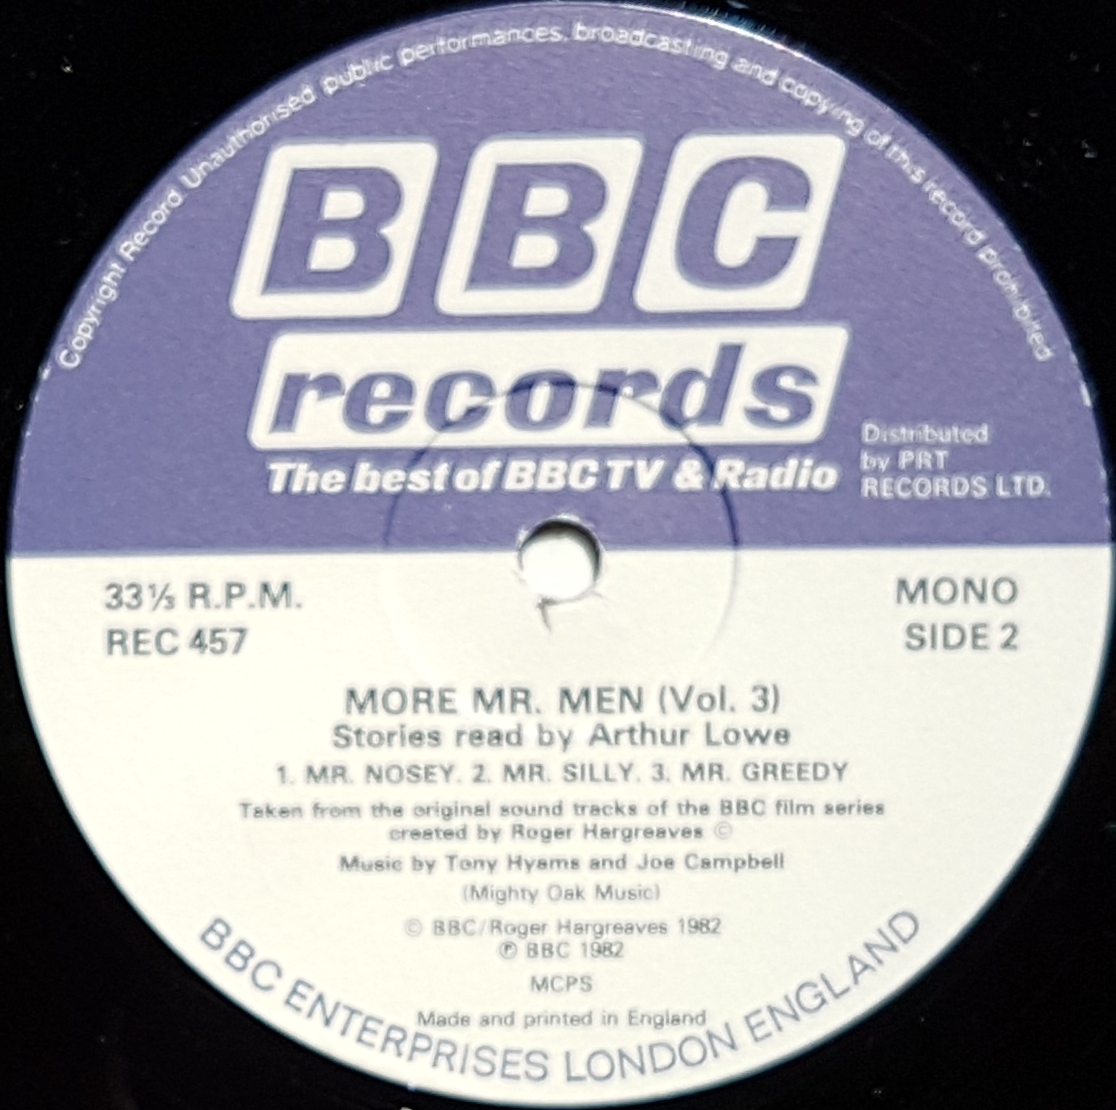 BBC Records and Tapes1 label